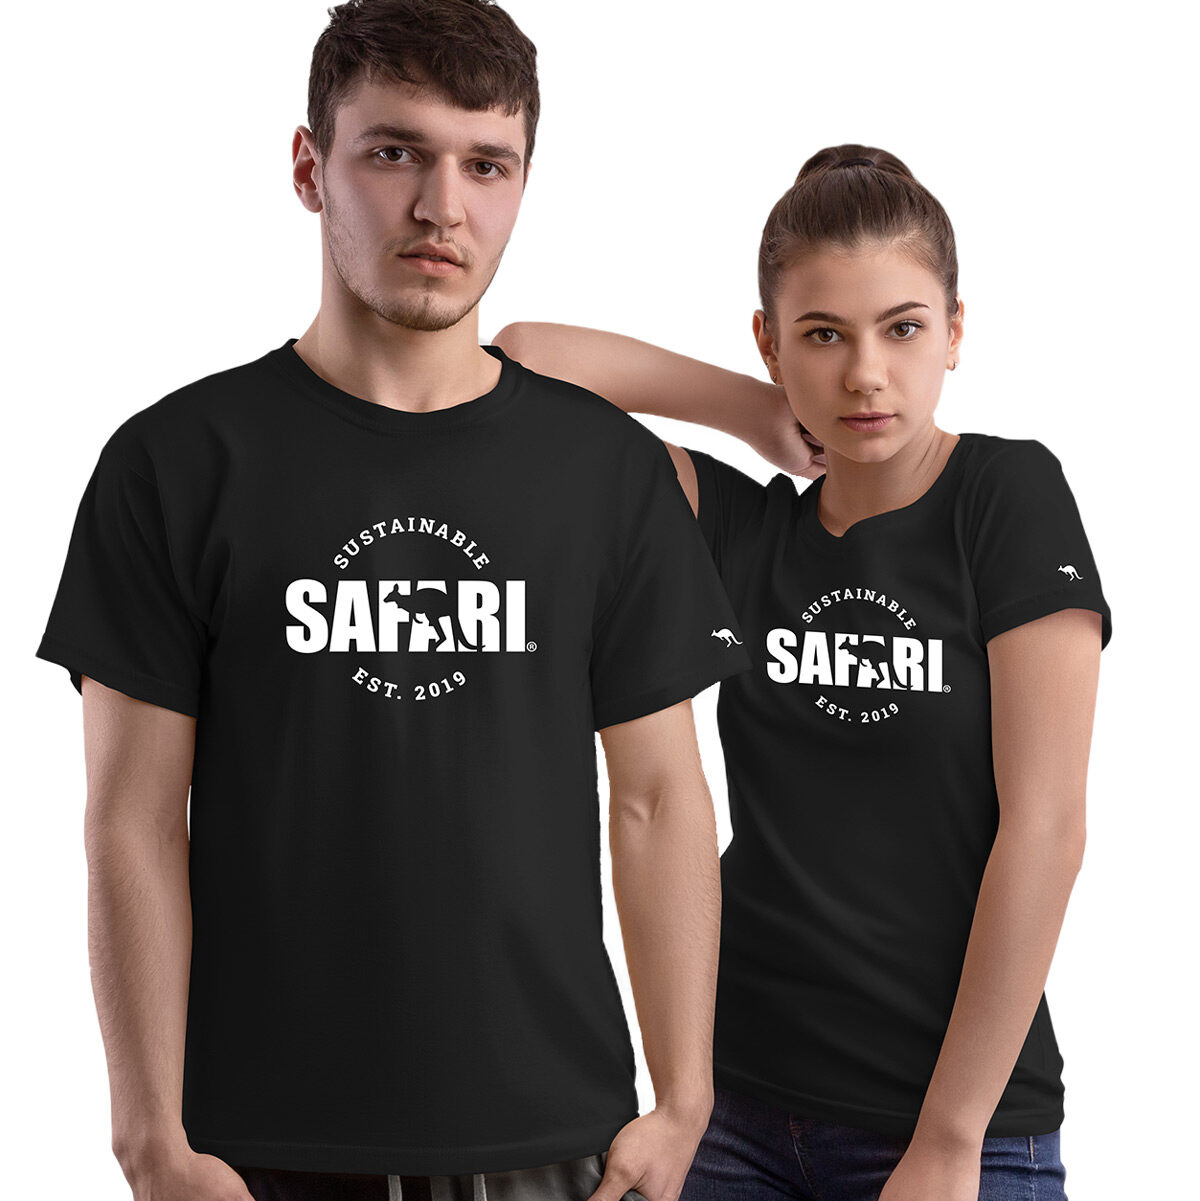 man and woman wearing black Sustainable Safari branded t-shirts